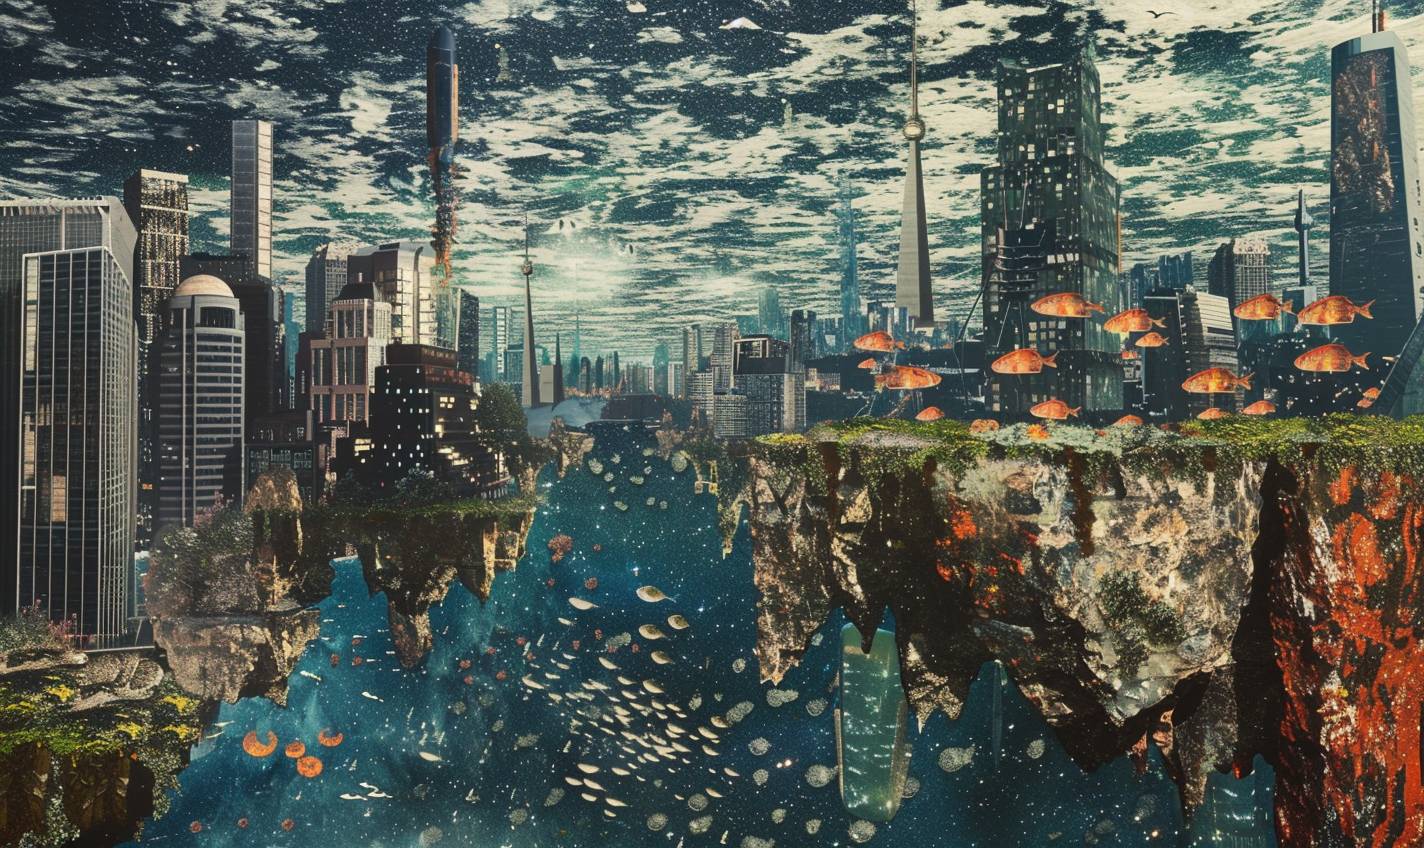 In style of Grandma Moses, Cybernetic cityscape teeming with artificial life